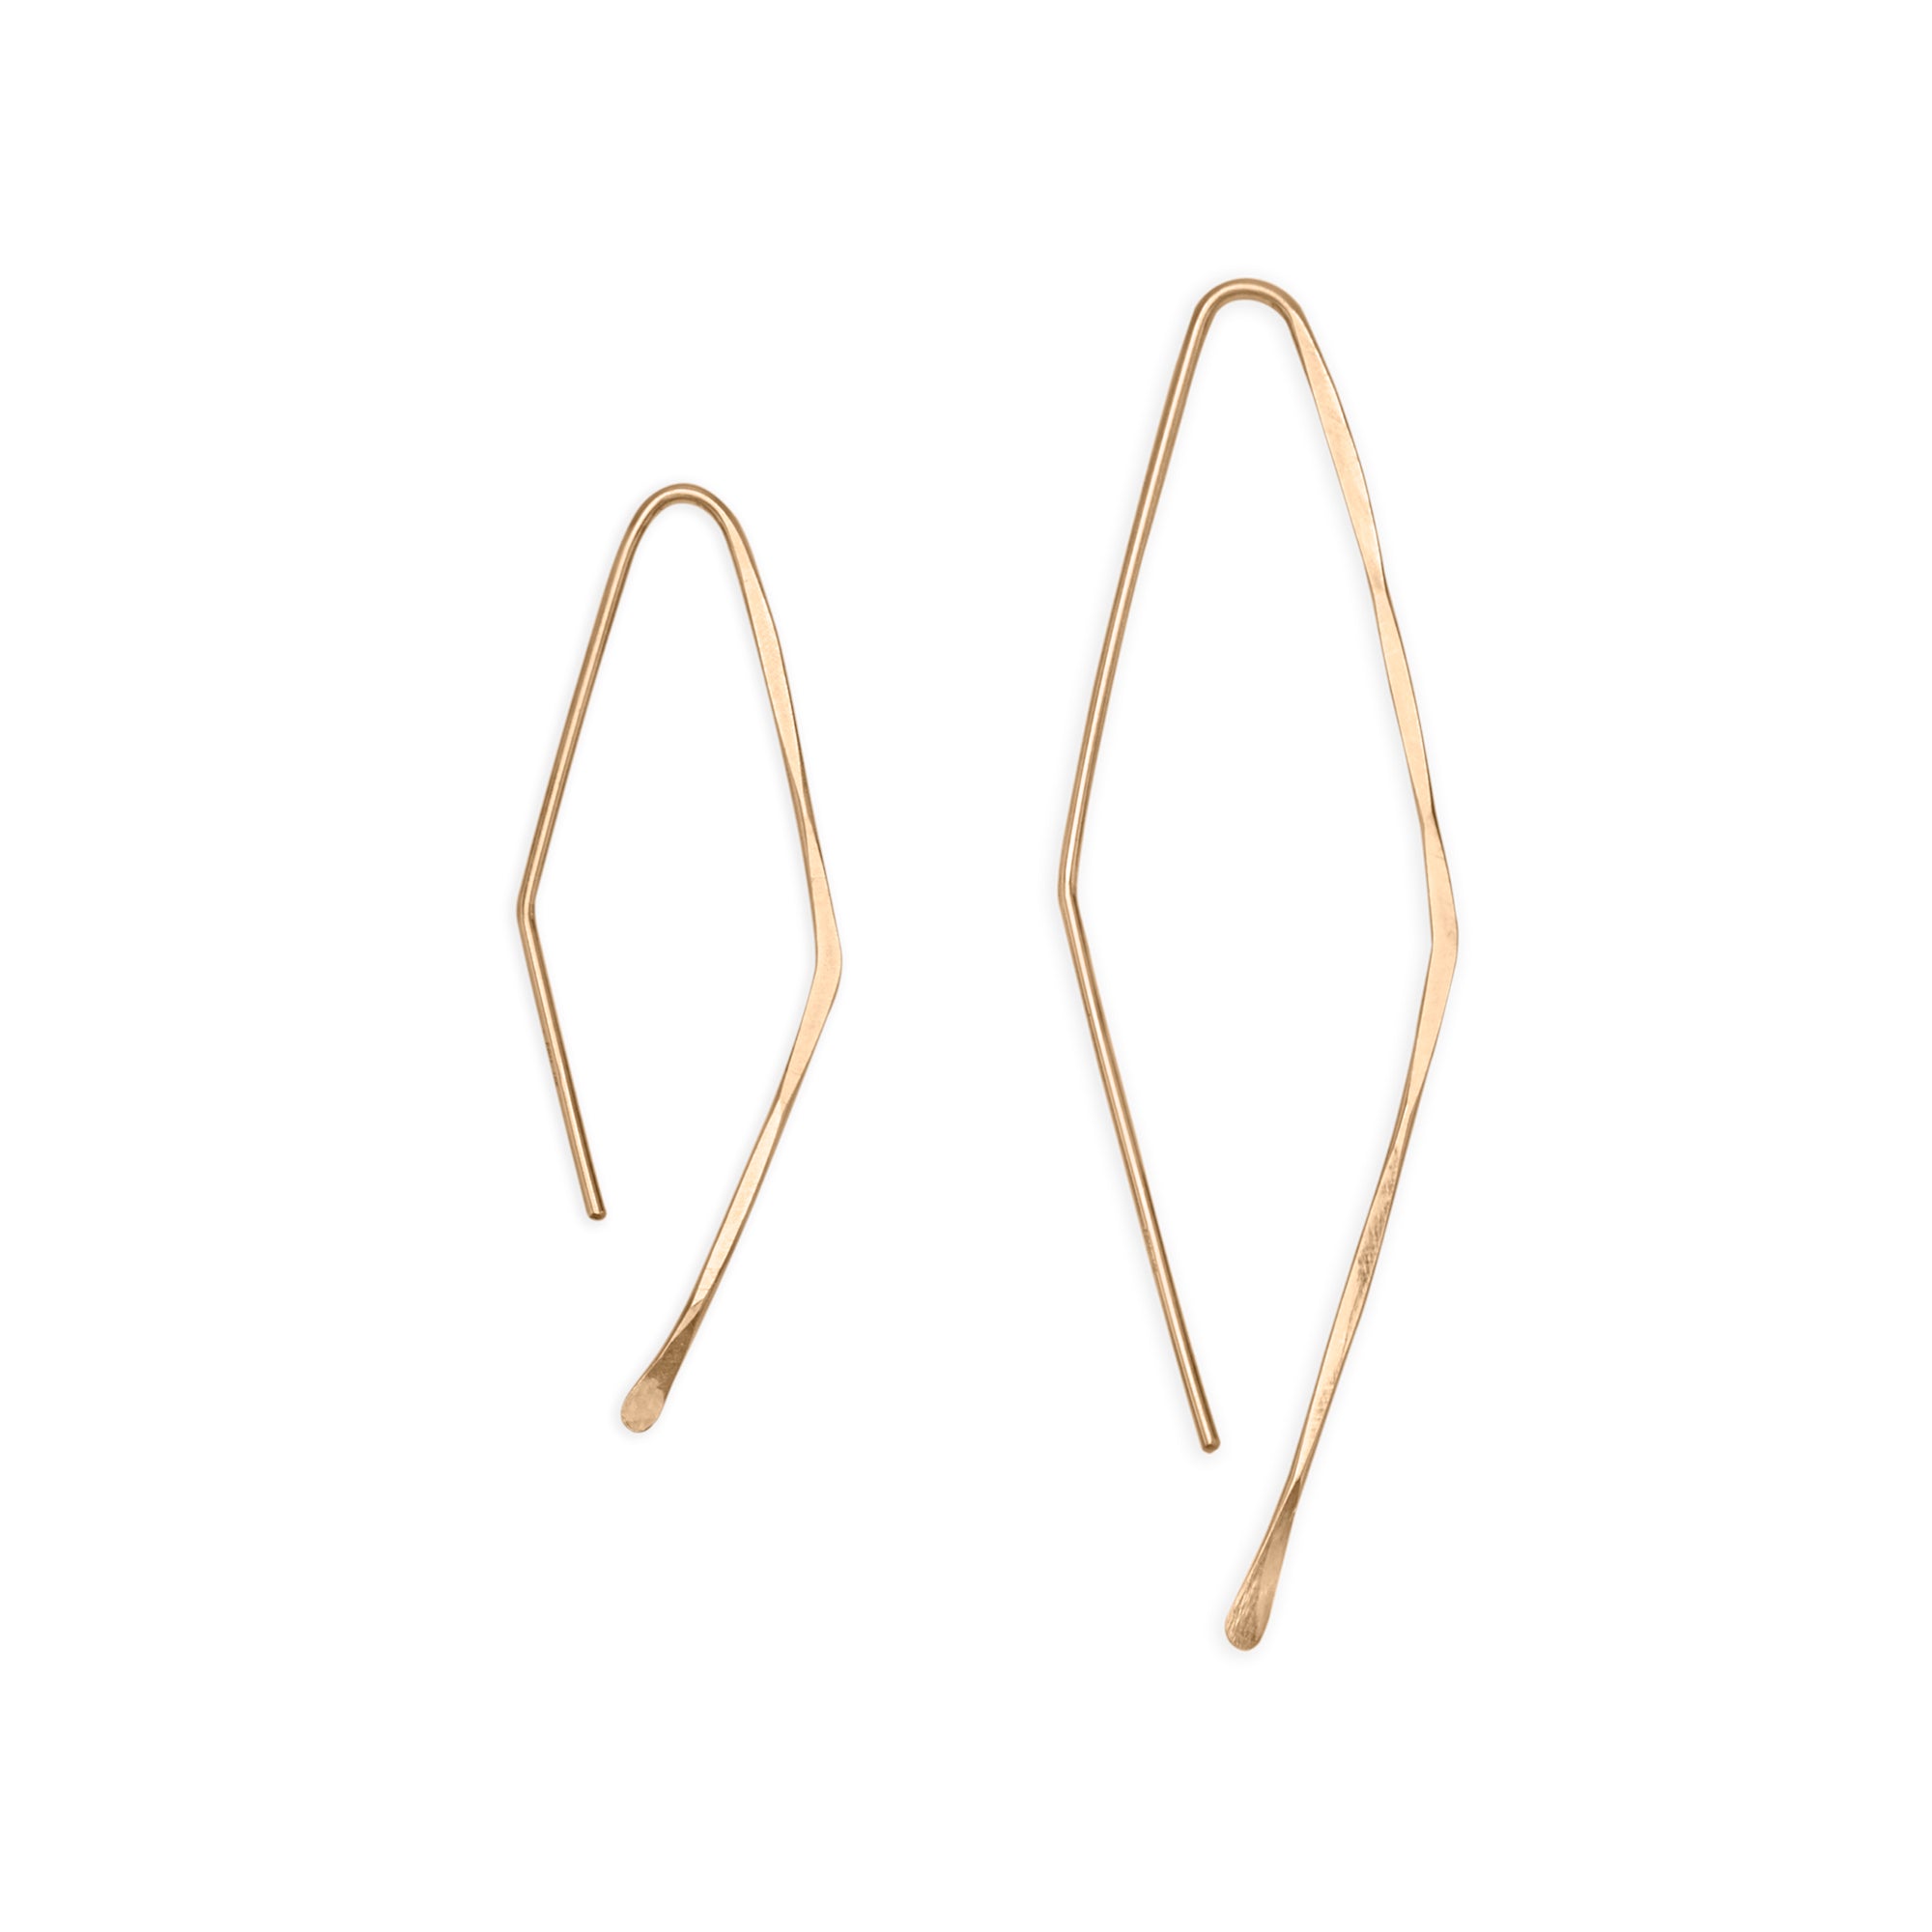 Diamond Hoop earrings, featuring a hammered 14k gold wire that hangs on either side of the earlobe creating a diamond shape